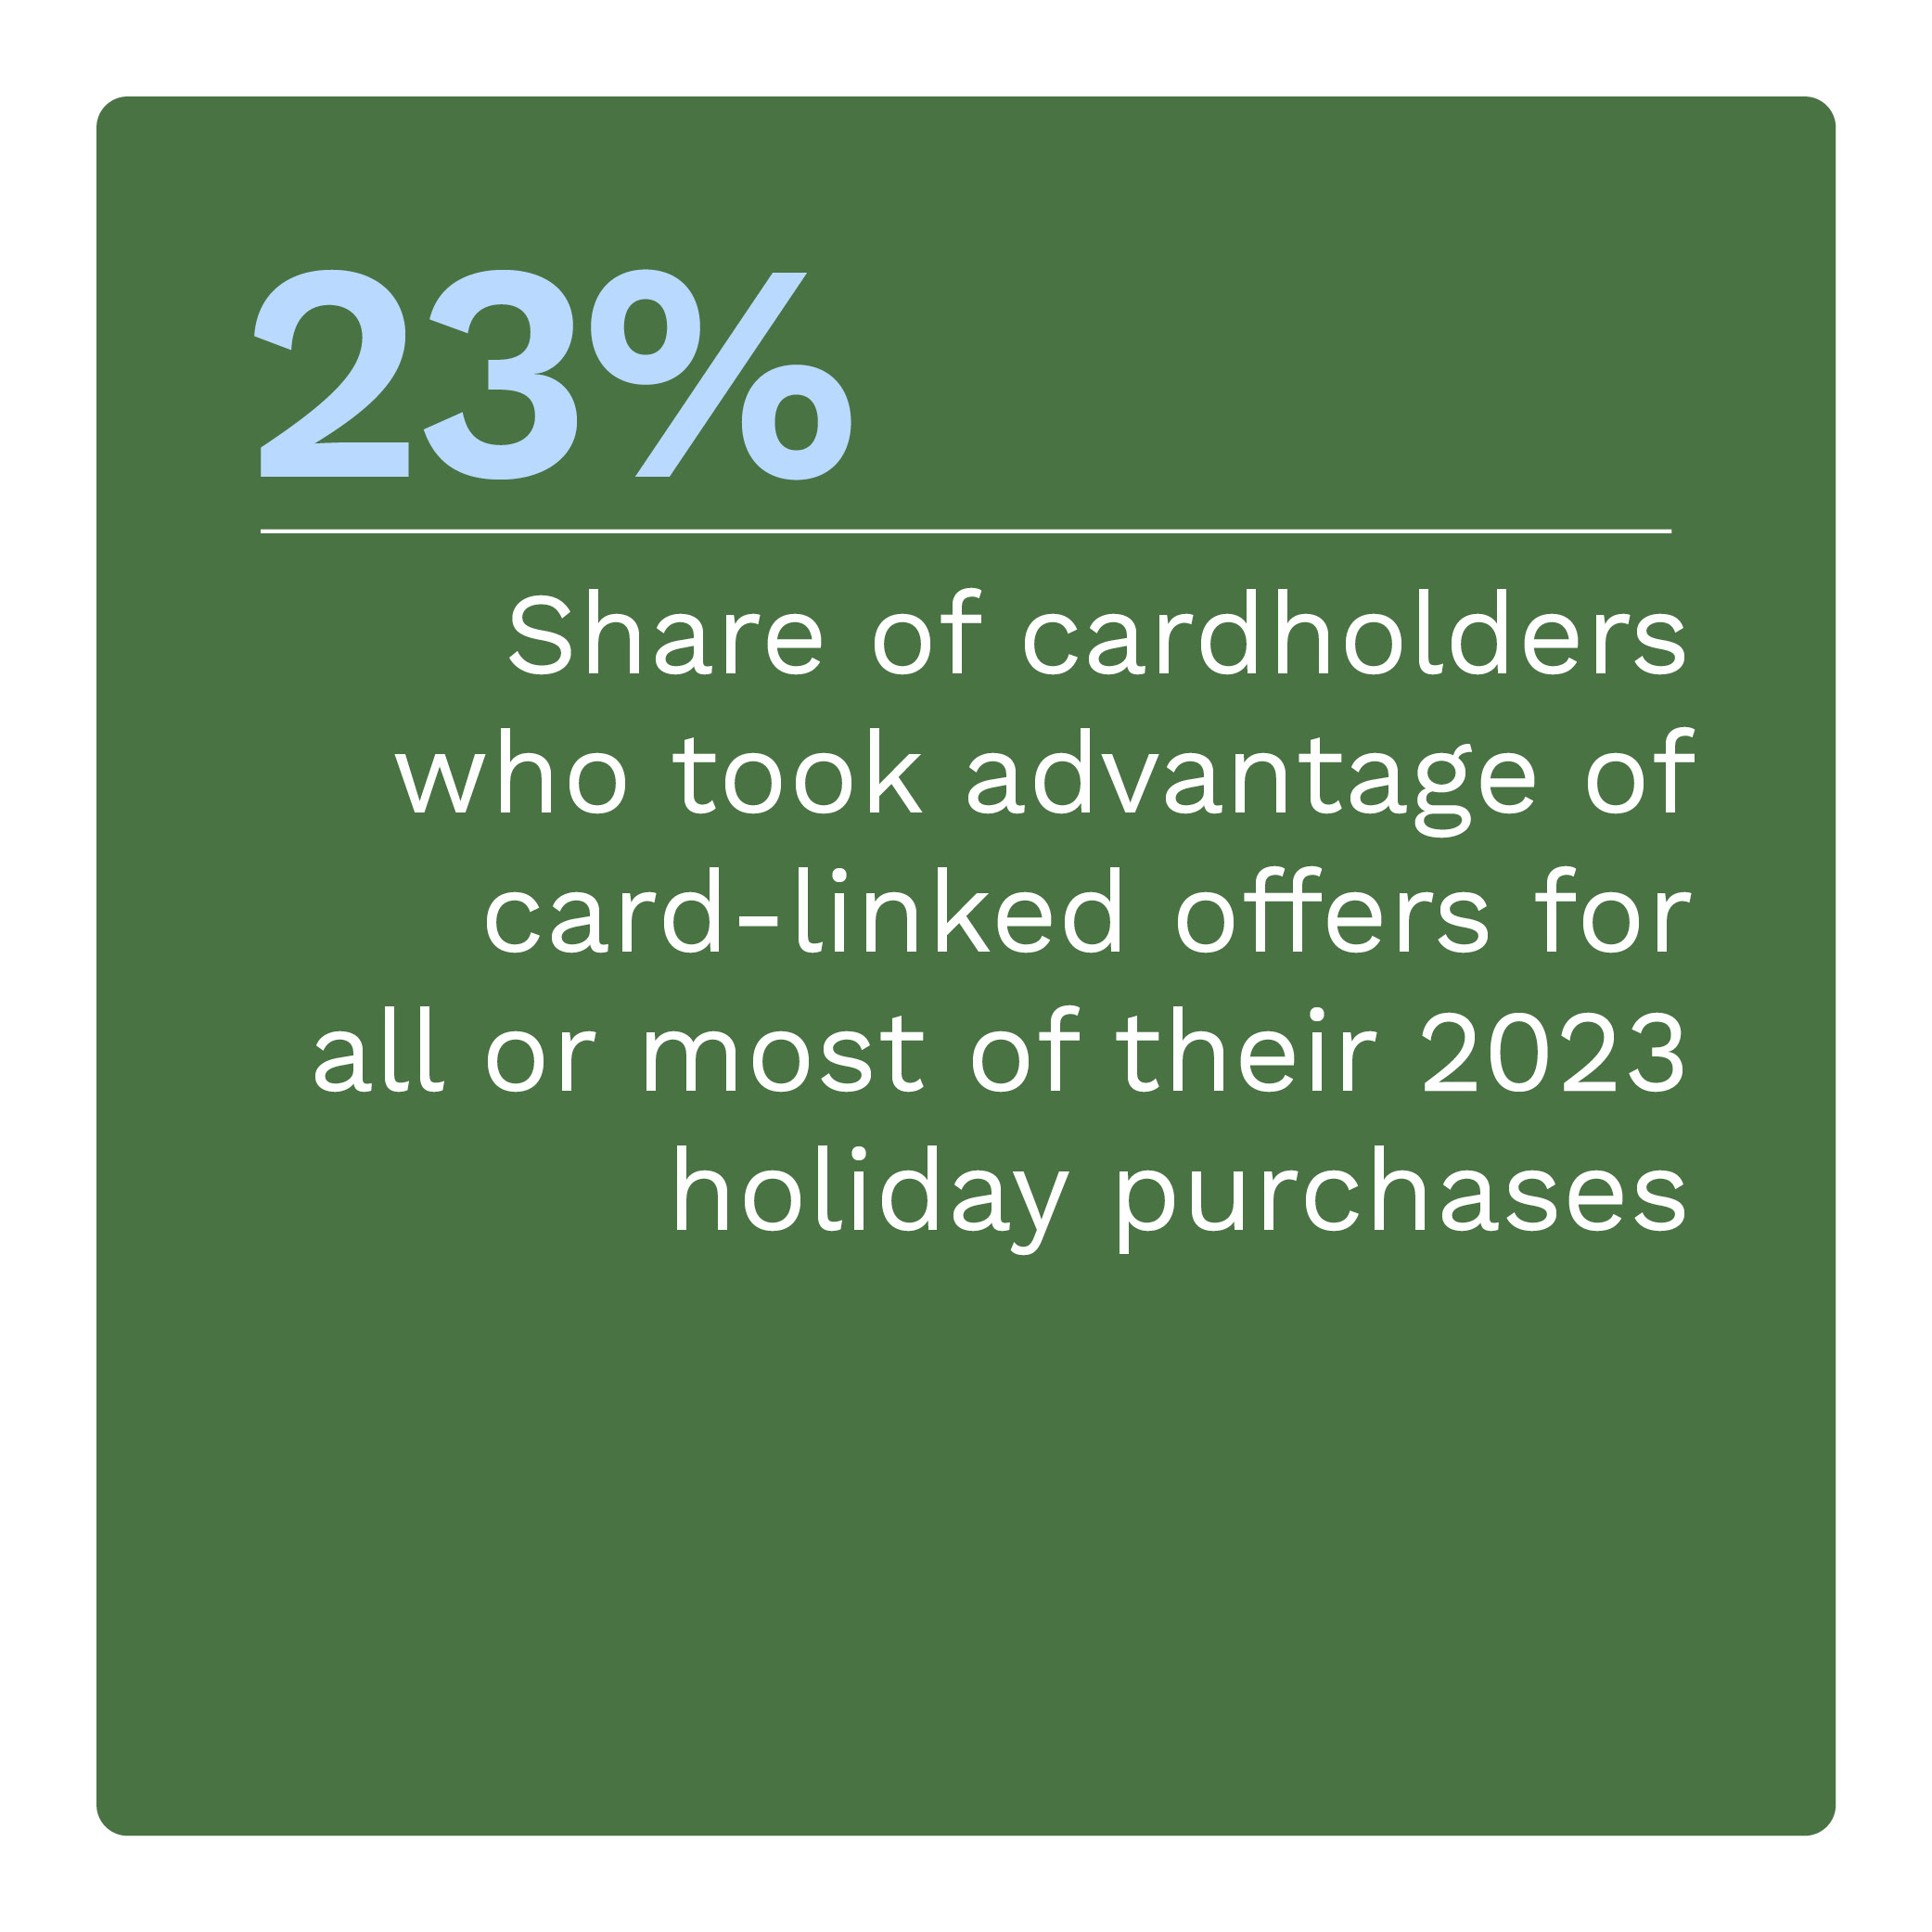  Share of cardholders took advantage of card-linked offers for all or most of their 2023 holiday purchases